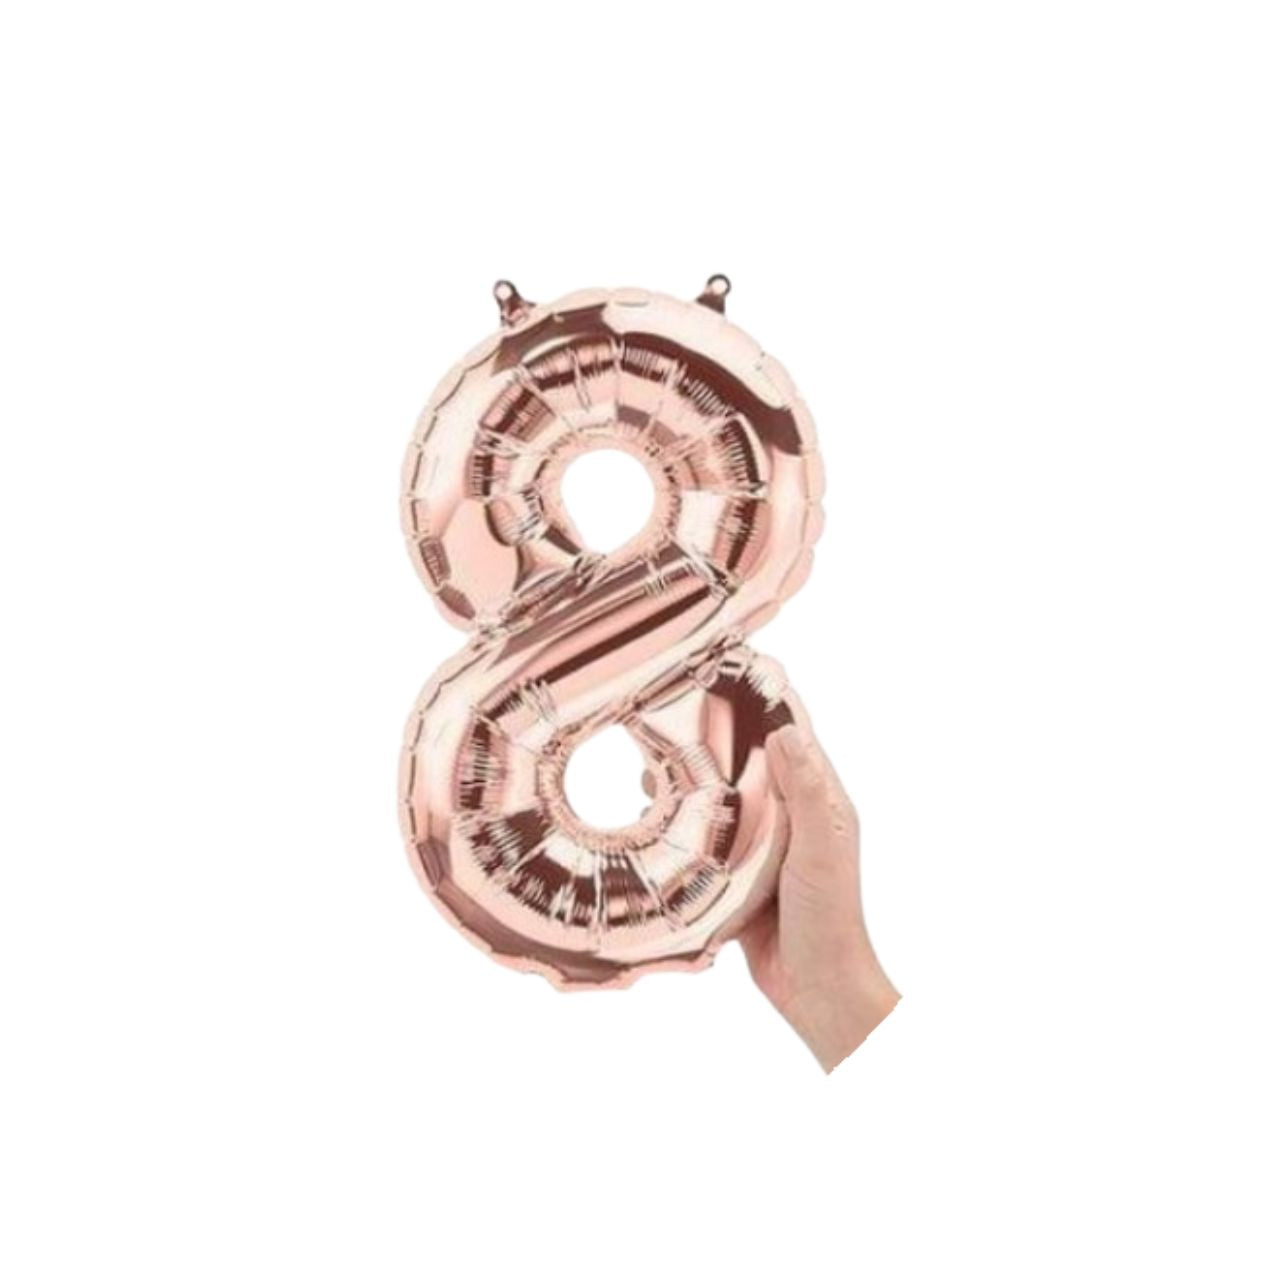 16" (41cm) Rose Gold Foil Number Balloon - 8 (Air-Fill)